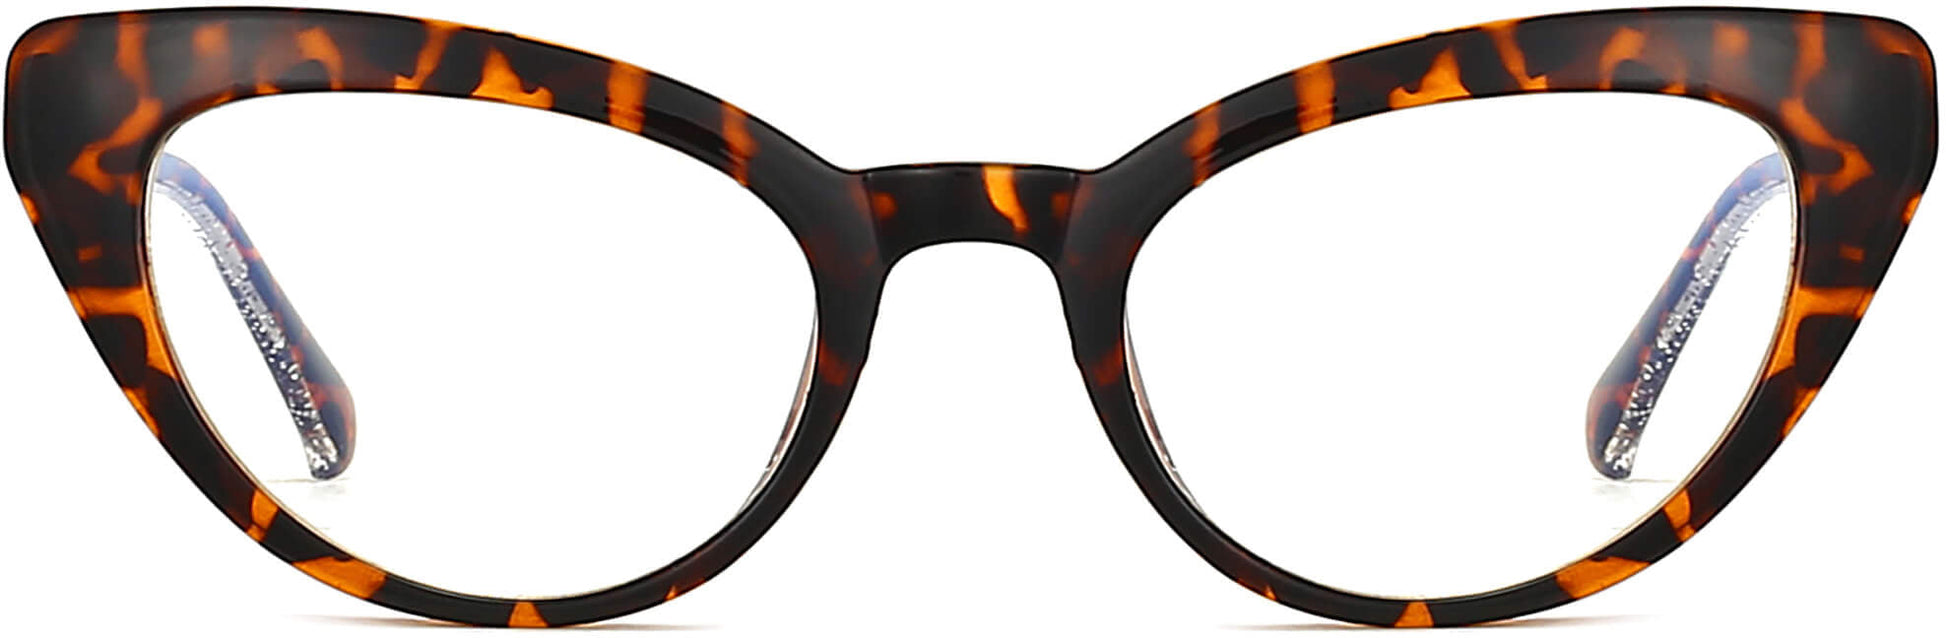 Airlie Cateye Tortoise Eyeglasses from ANRRI, front view